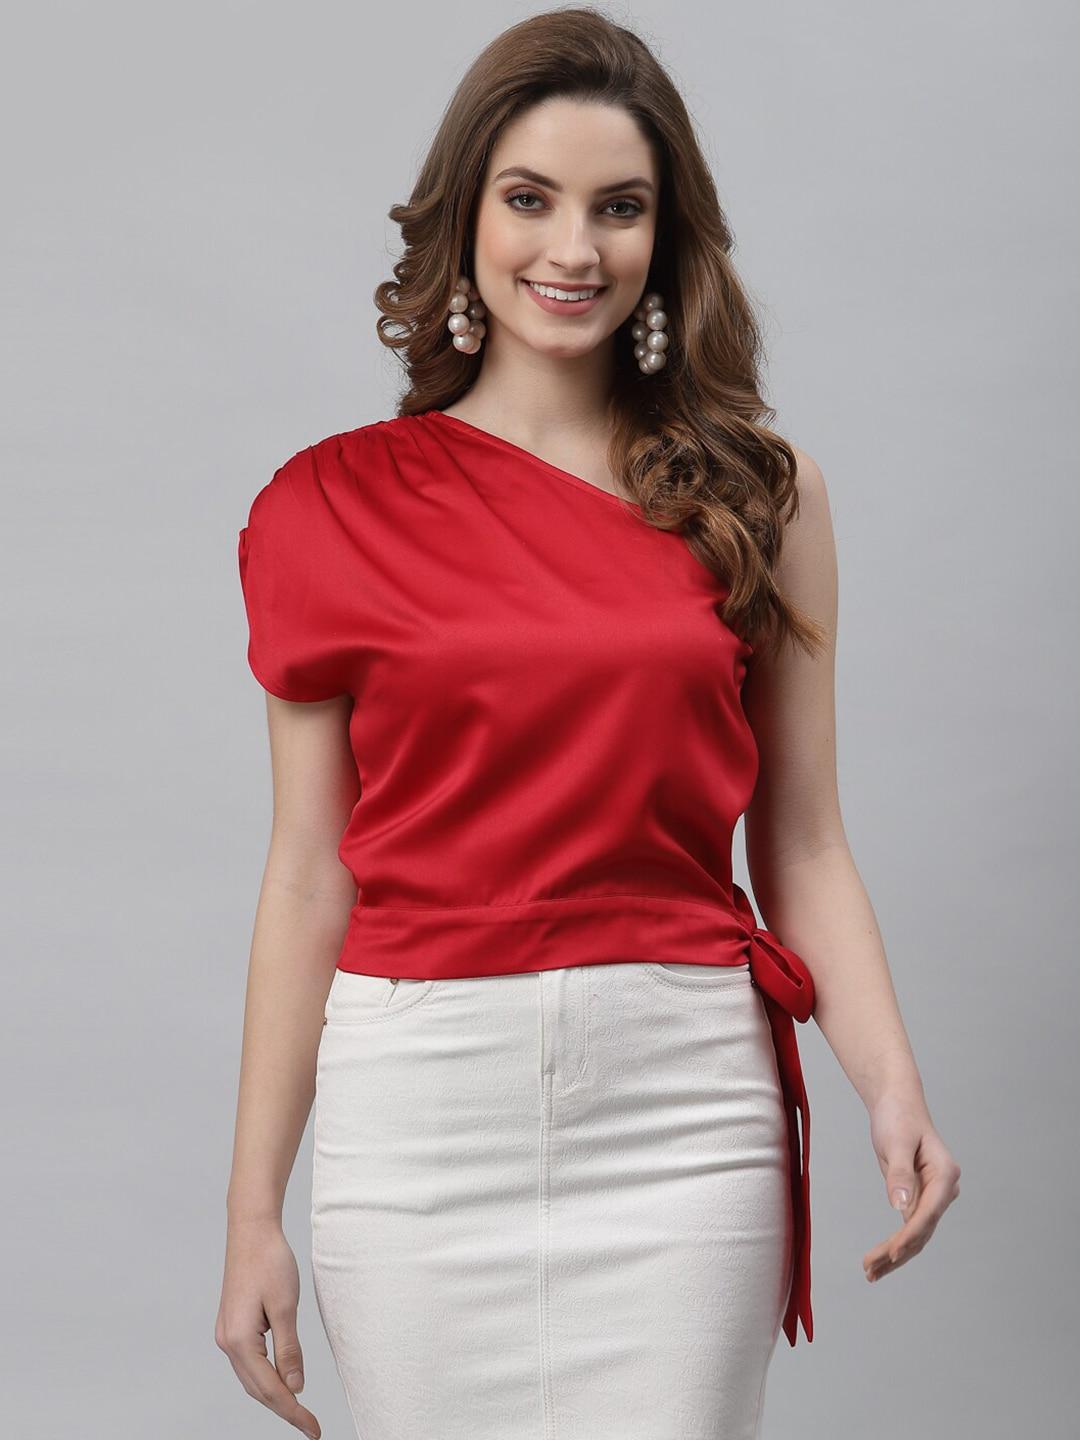 neudis-red-one-shoulder-extended-sleeves-sheen-satin-top